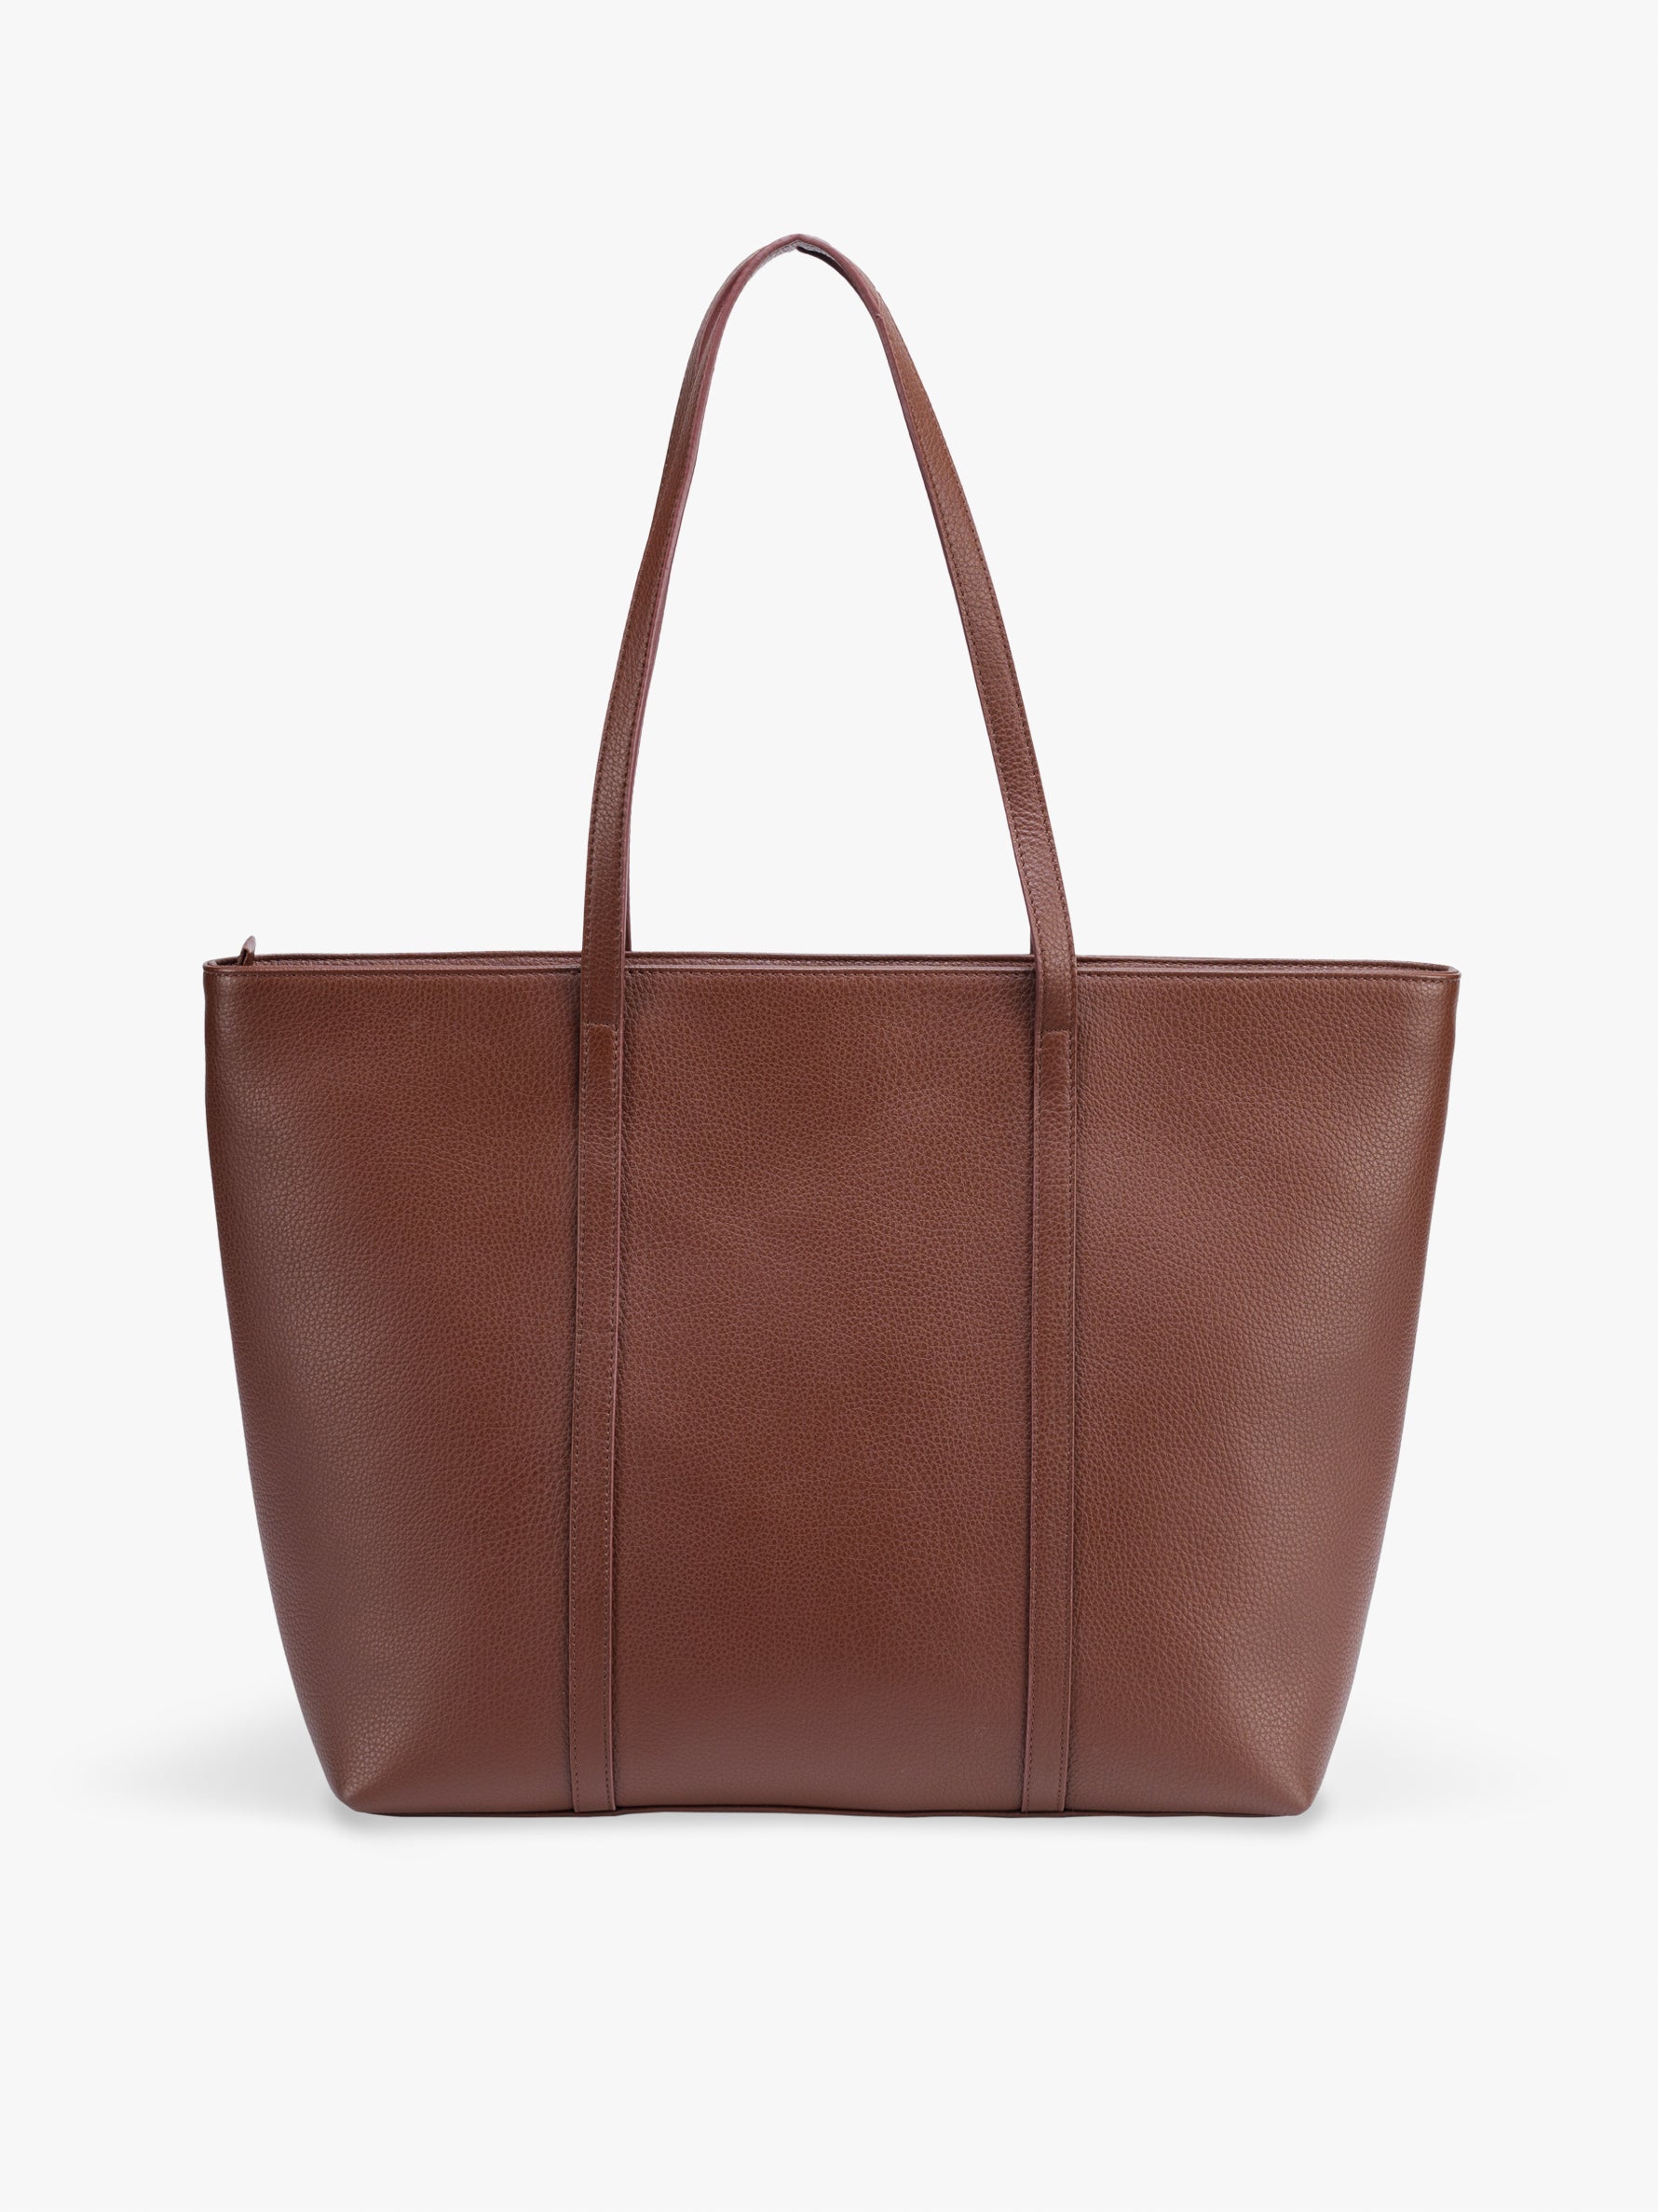 Handcrafted genuine leather 365 days tote bag for women Espresso Brown